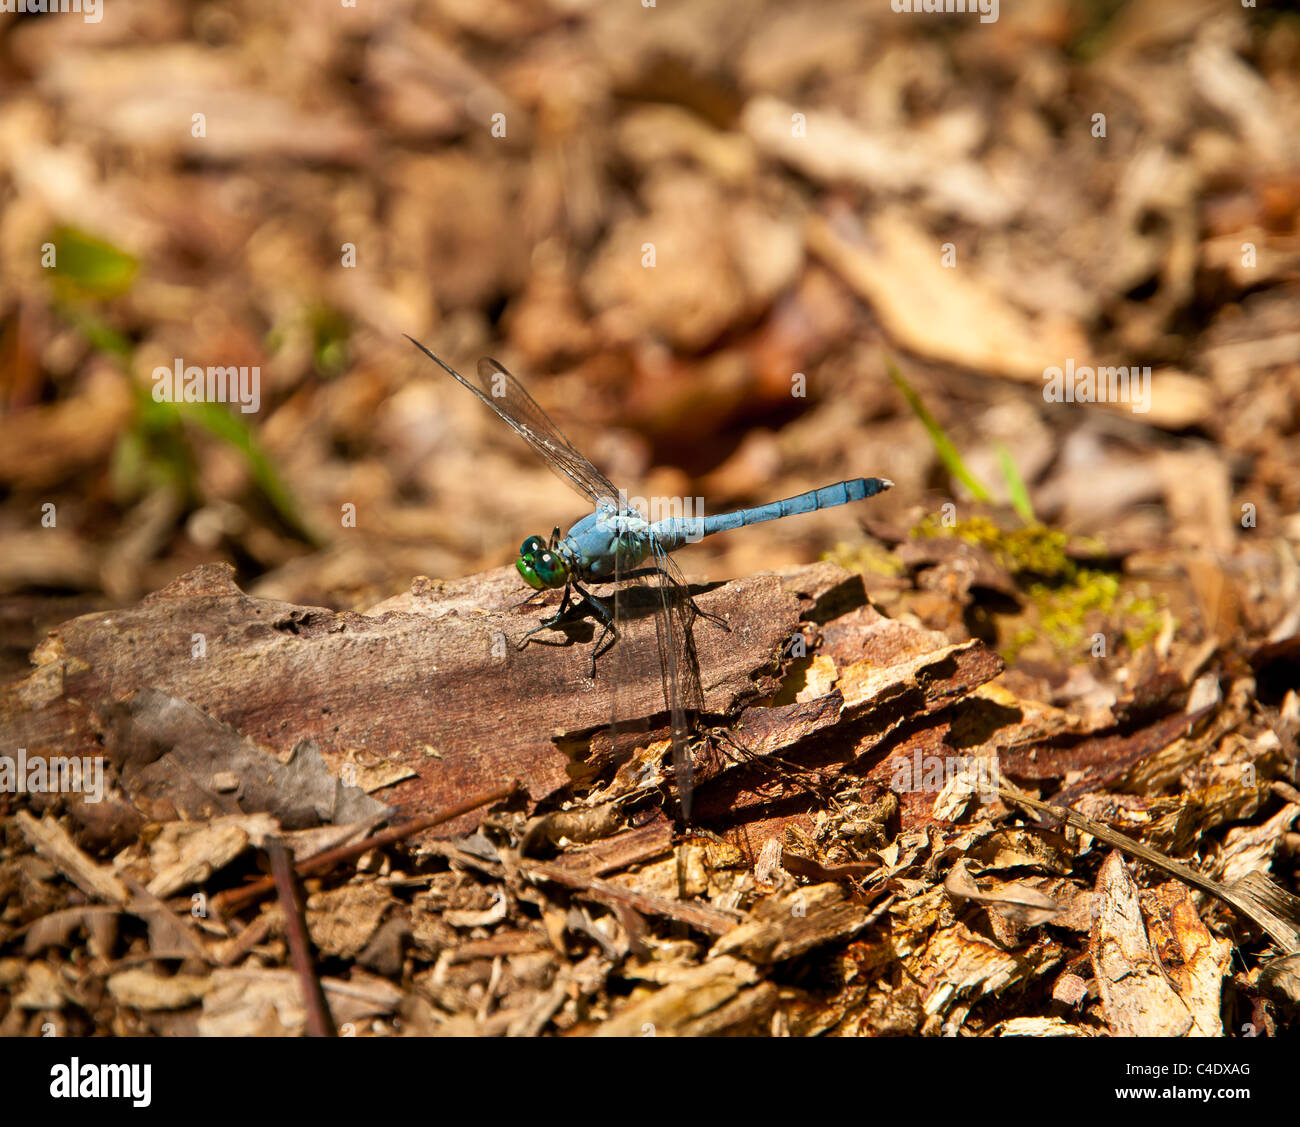 Blue dragonfly with green eyes sitting on log in a swamp on the Natchez Trace Parkway, Mississippi USA Stock Photo